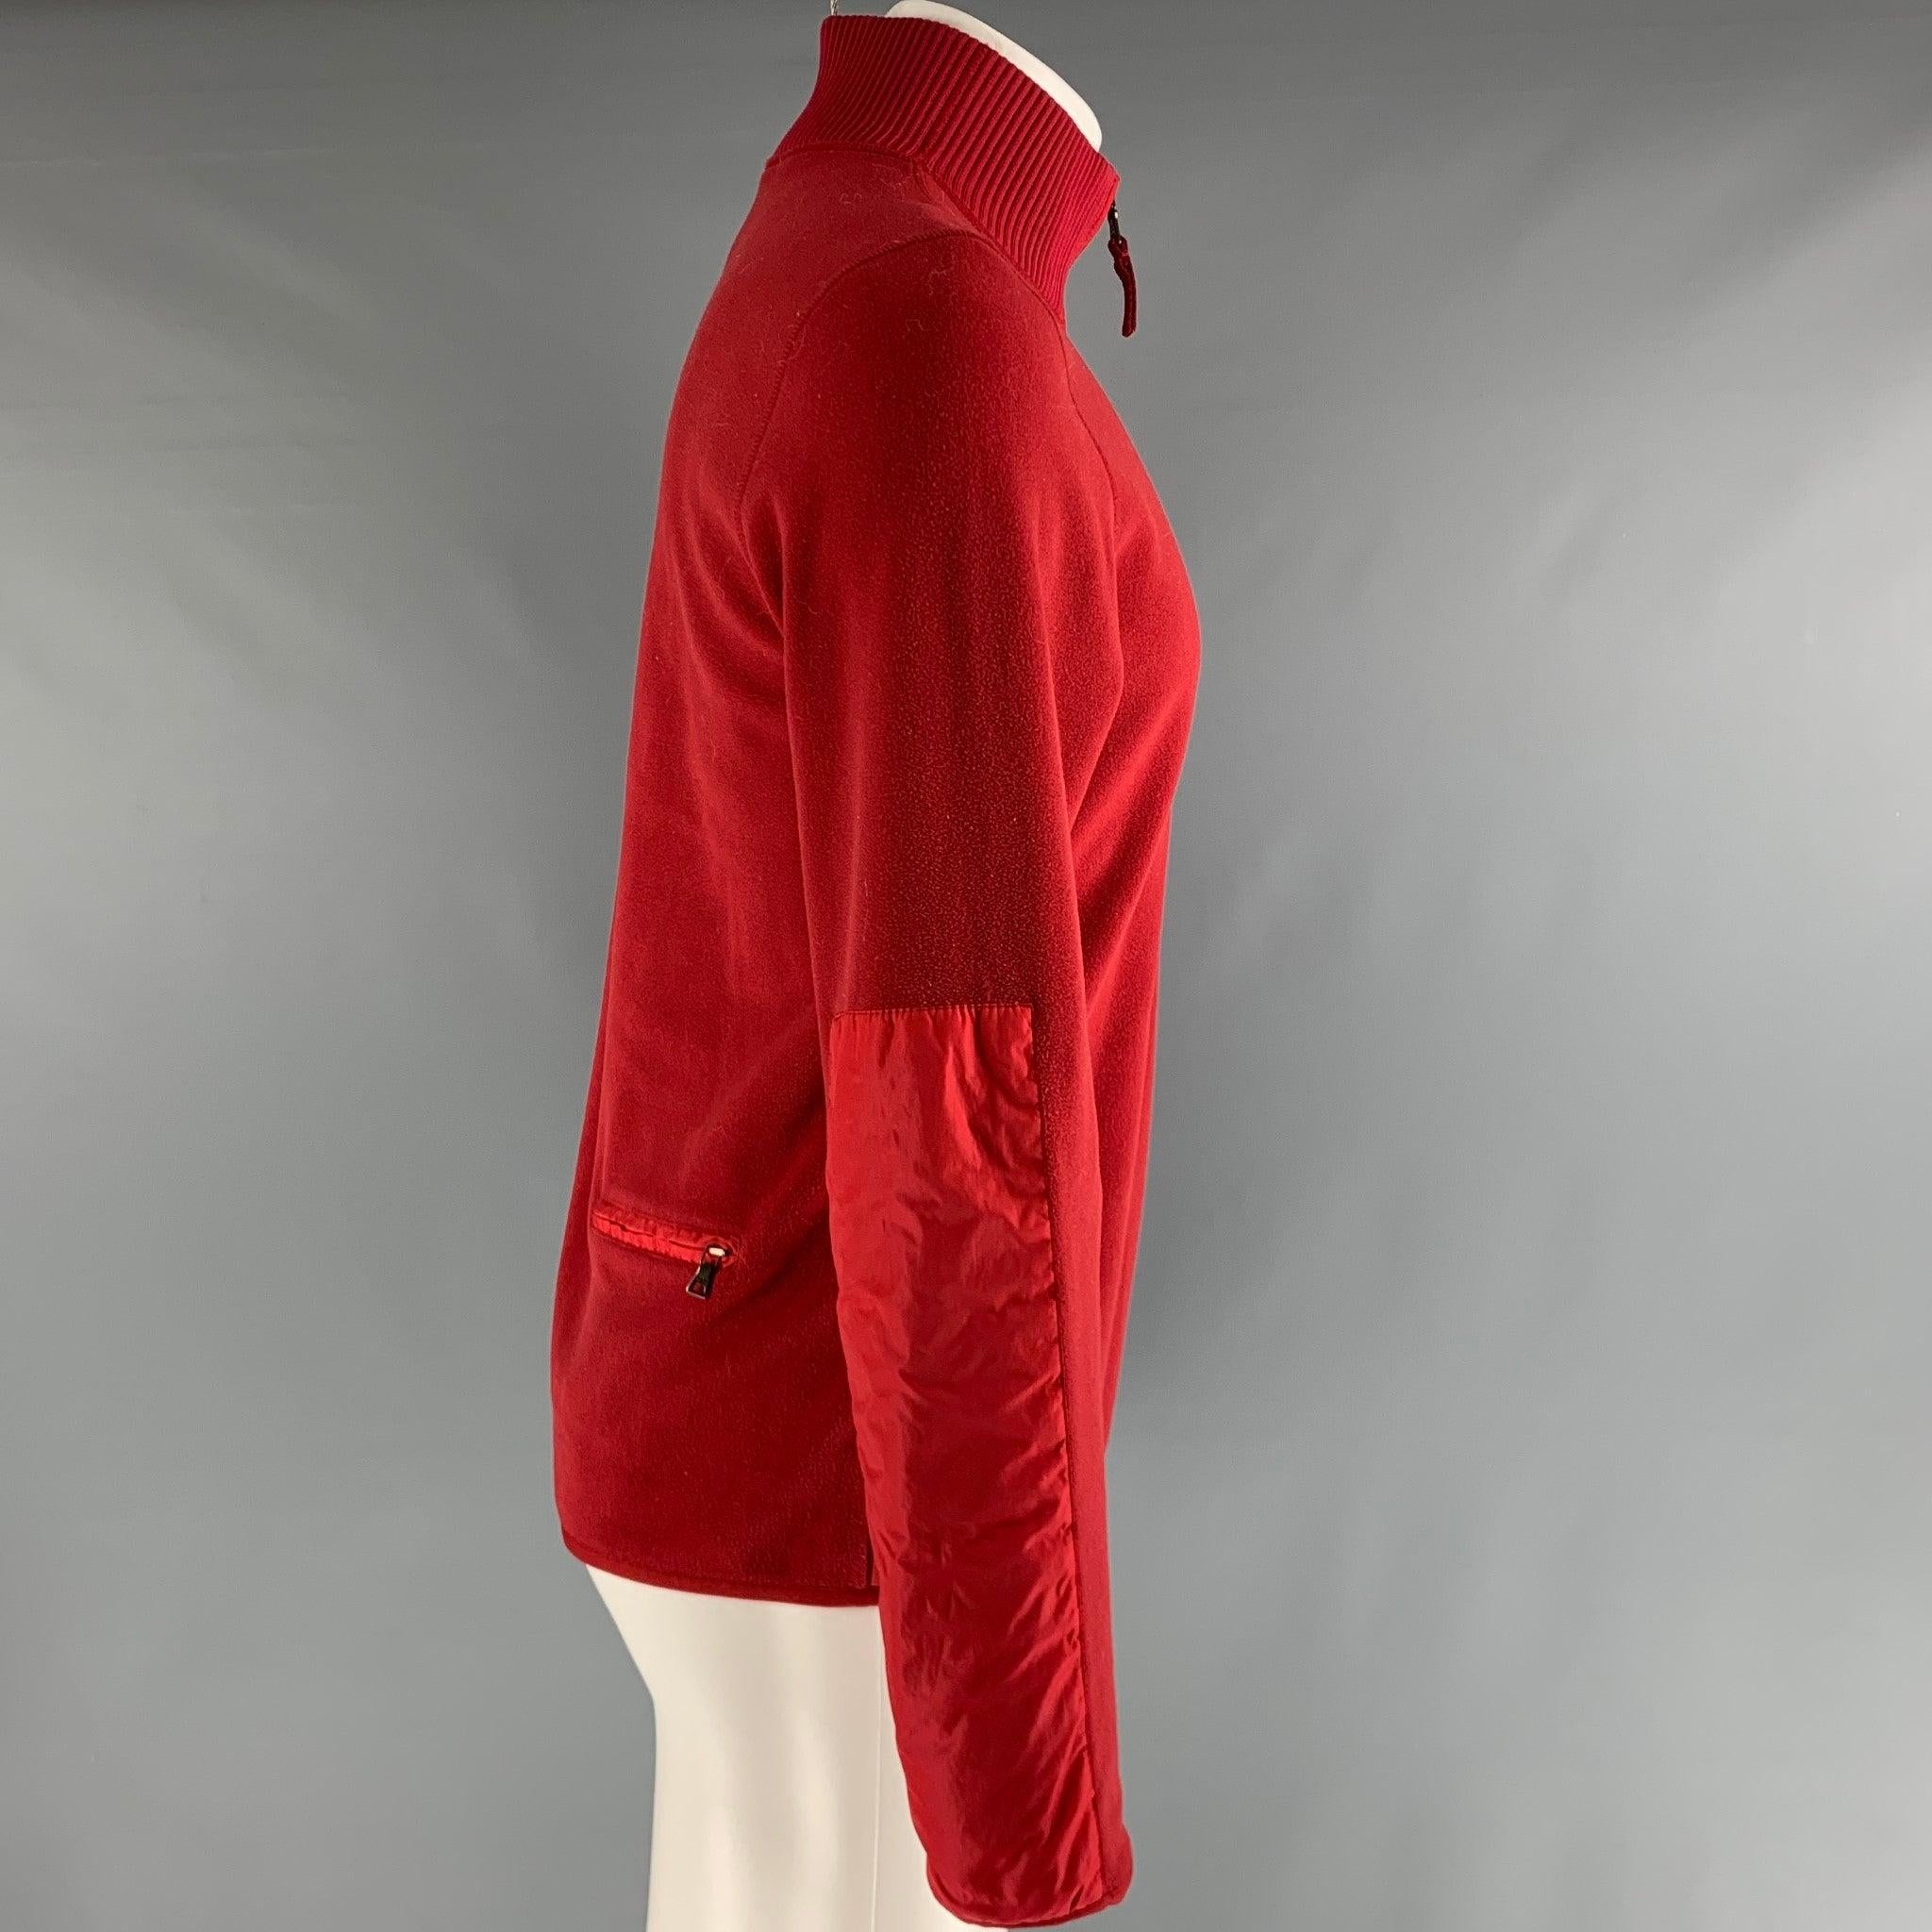 PRADA SPORT pullover comes in red polyester fleece featuring a back pocket, and 1/4 zip up closure.Very Good Pre-Owned Condition. 

Marked:   M 

Measurements: 
 
Shoulder: 17.5 inches Chest: 40 inches Sleeve: 26 inches Length: 27 inches  
 
  
  
